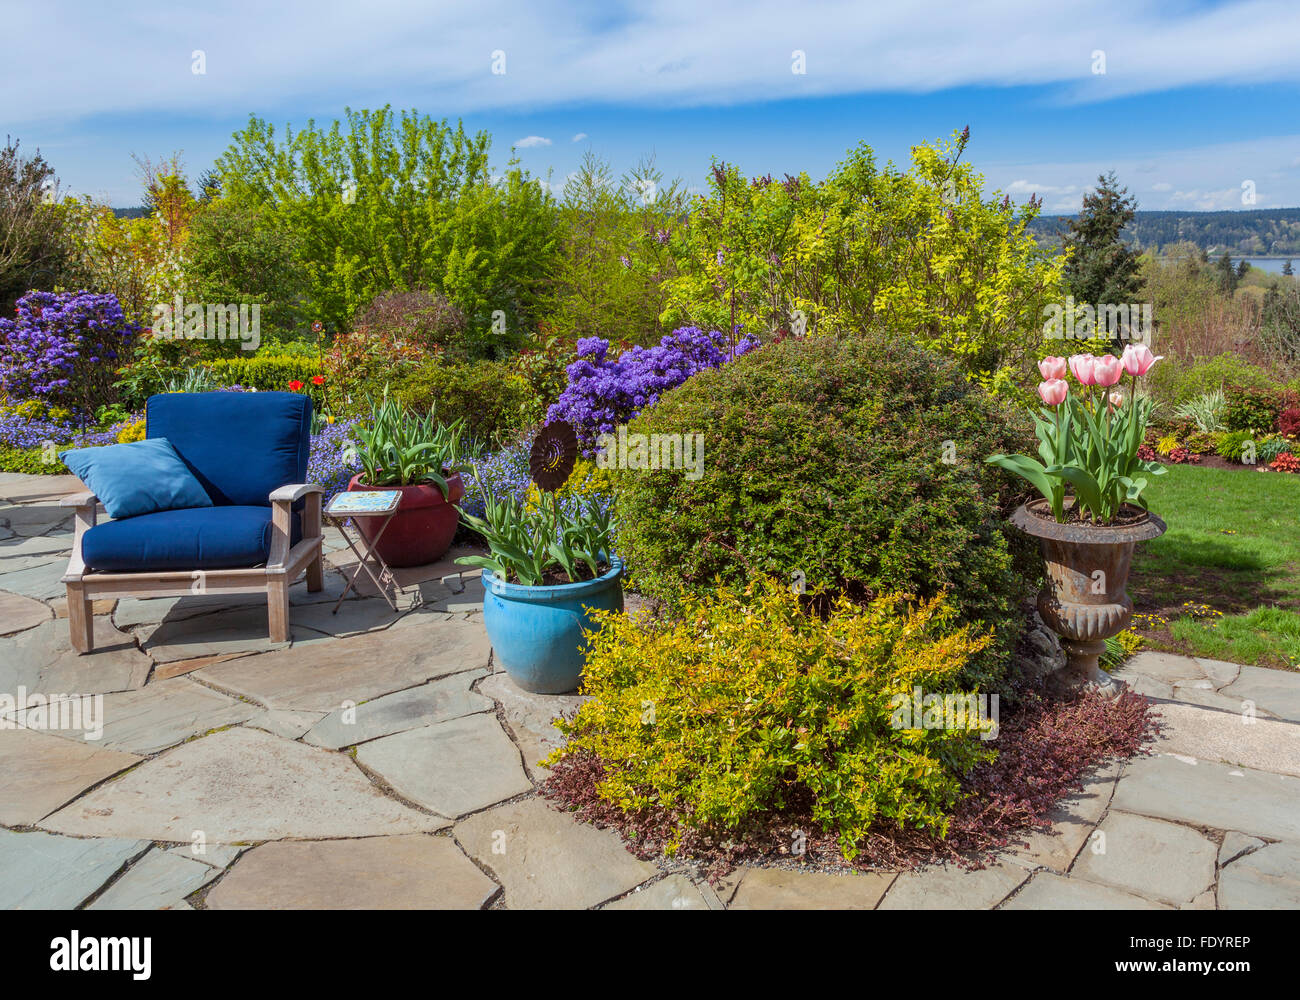 Vashon-Maury Island, WA: Flagstone patio with blue chair and colorful pots of tulips with perennial gardens Stock Photo